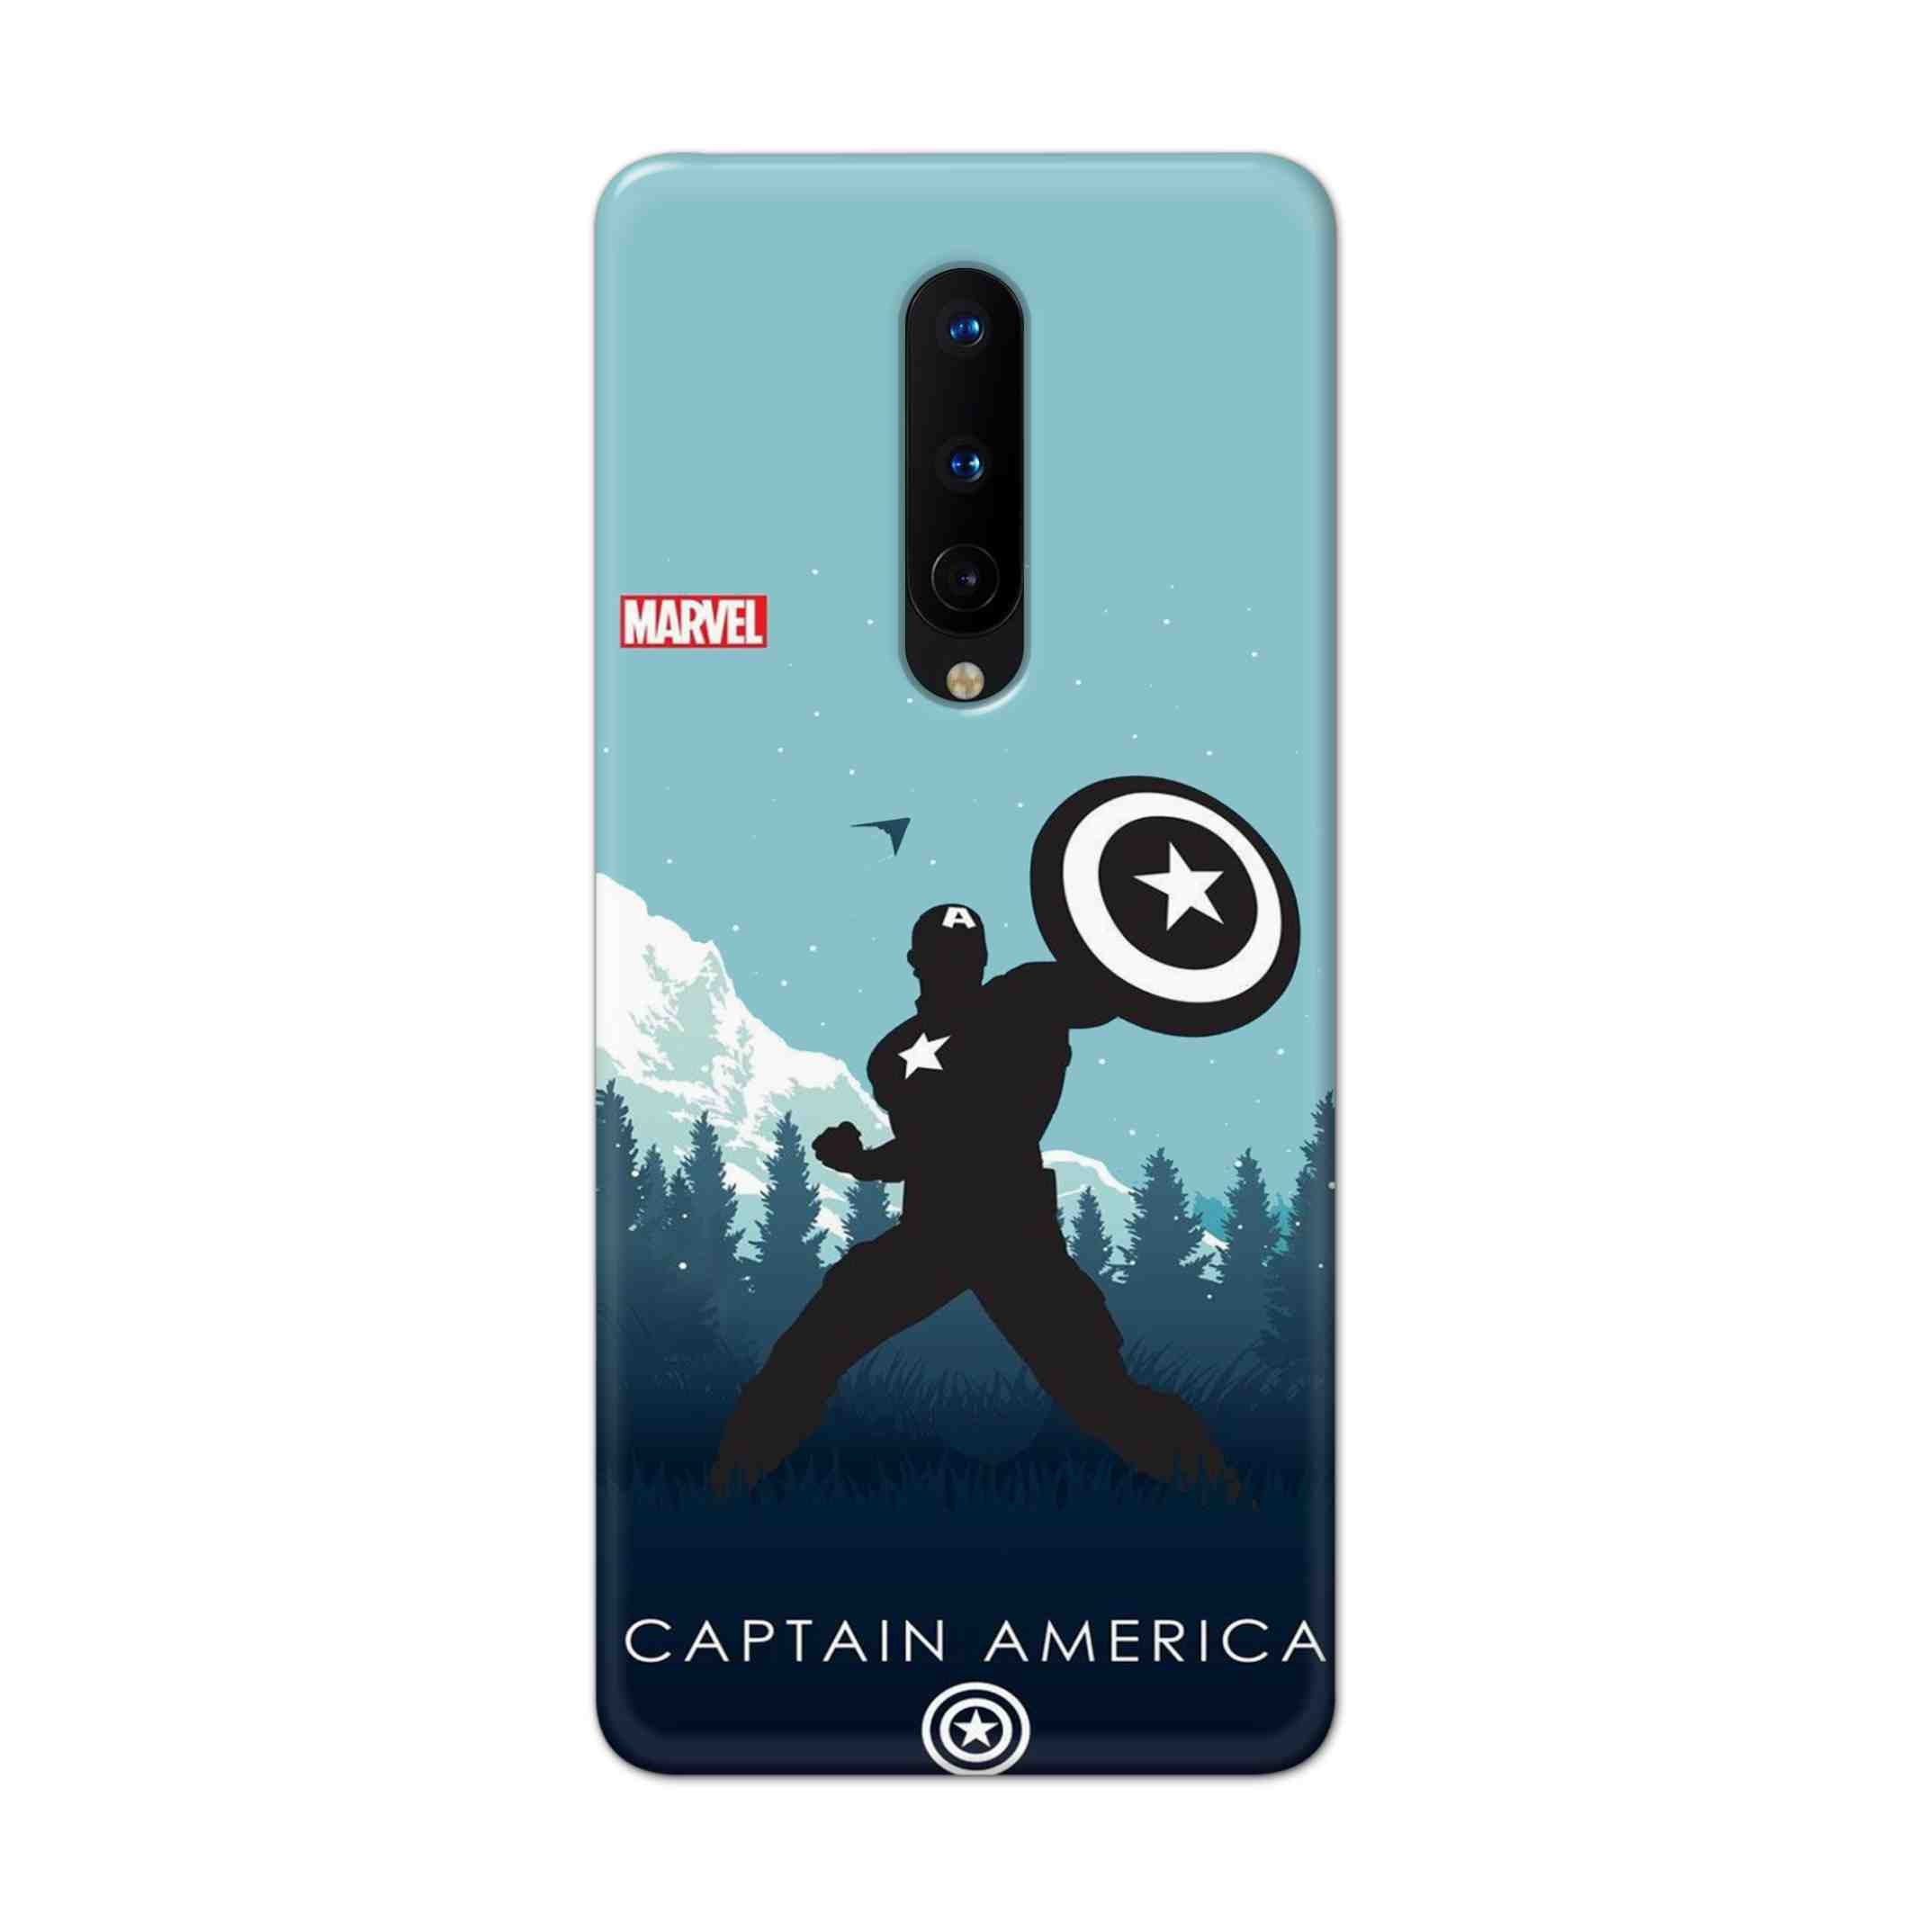 Buy Captain America Hard Back Mobile Phone Case Cover For OnePlus 8 Online